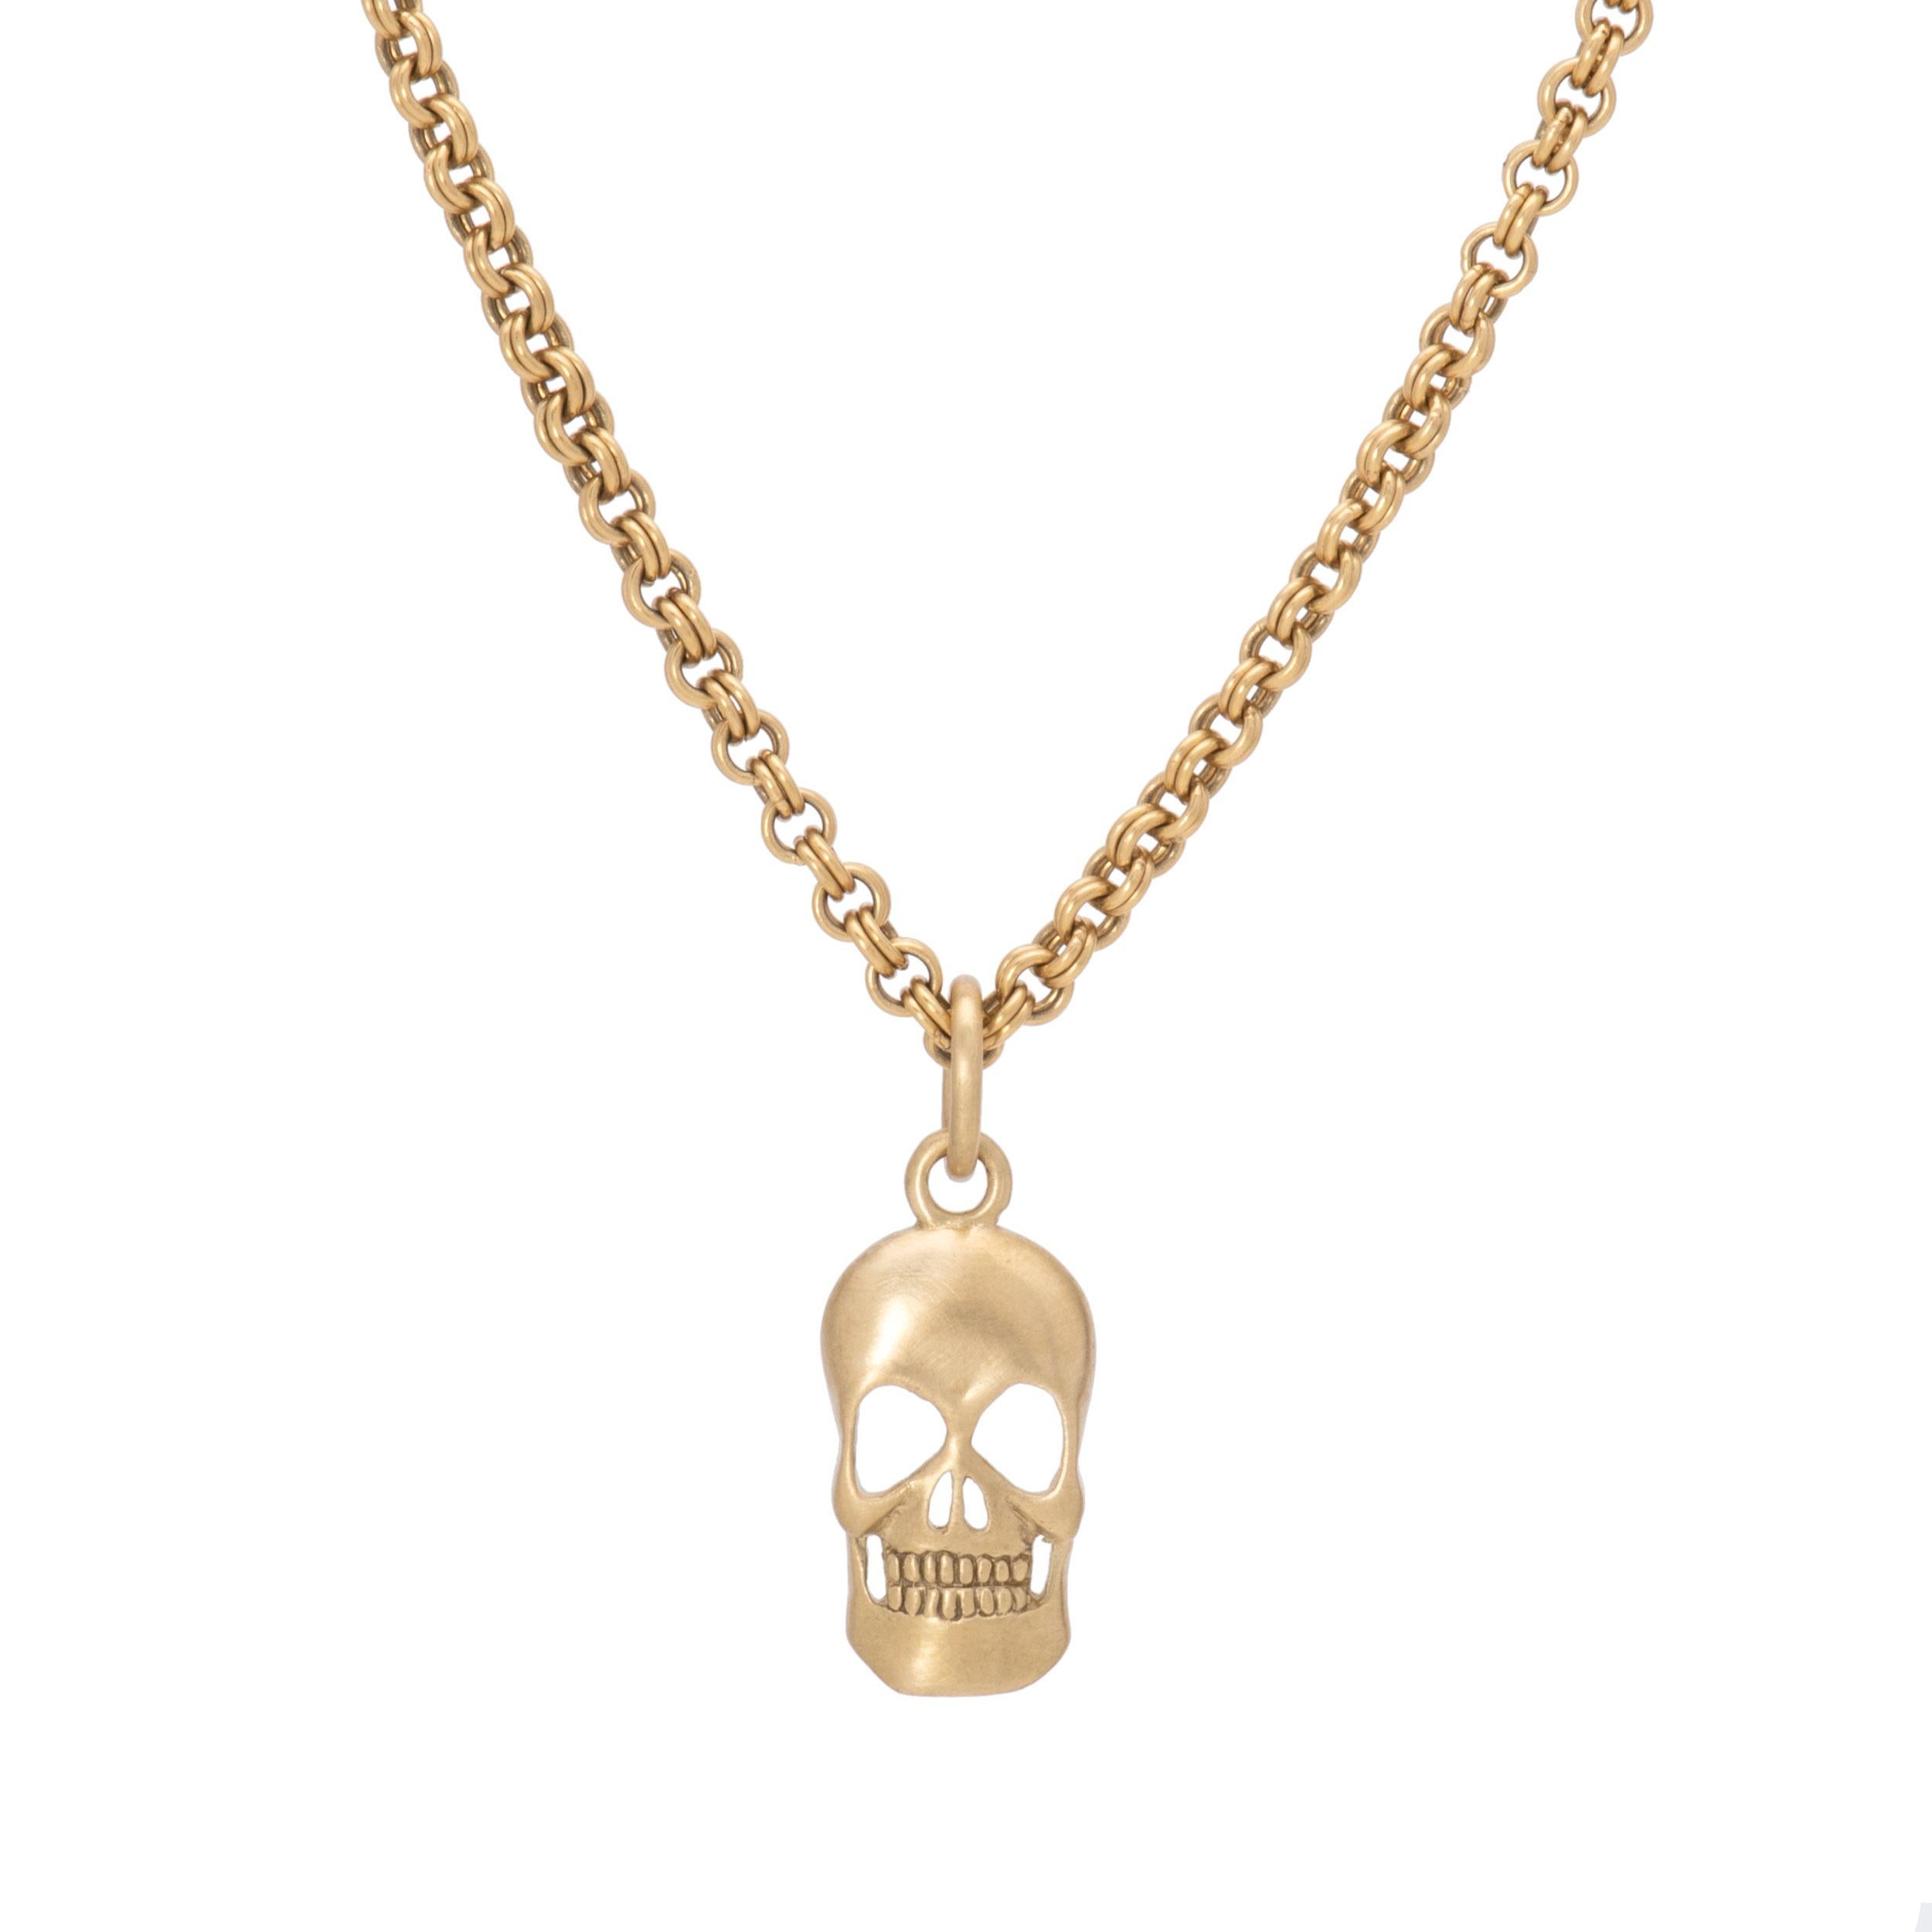 Our Skull Pendant in 18 karat gold is hand crafted in our studio with our signature satin finish offering a lustrous take on a classic. The curved form of our skull pendant reveals a 3 dimensional perspective with a stippled finish in the back. At